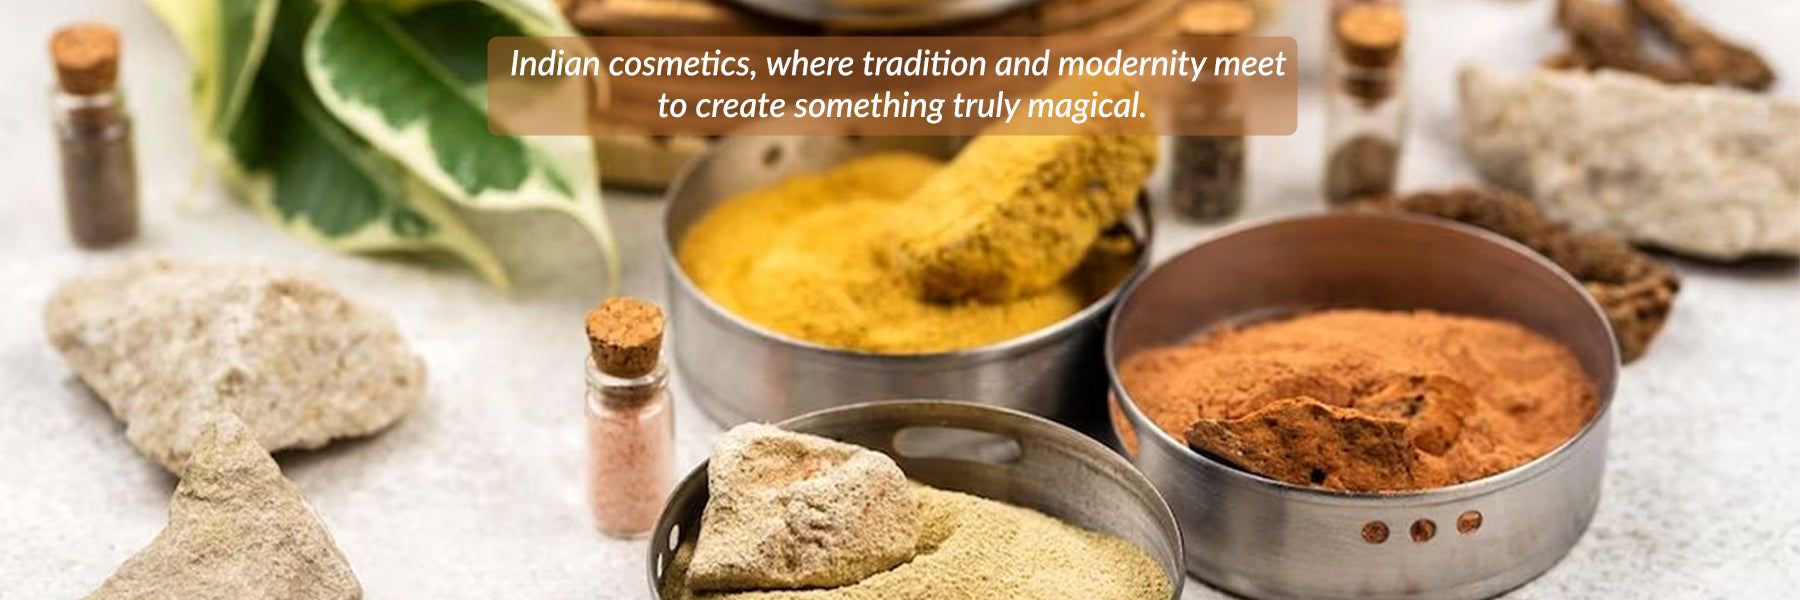 Indian cosmetics, where tradition and modernity meet to create something truly magical. FromIndia.com